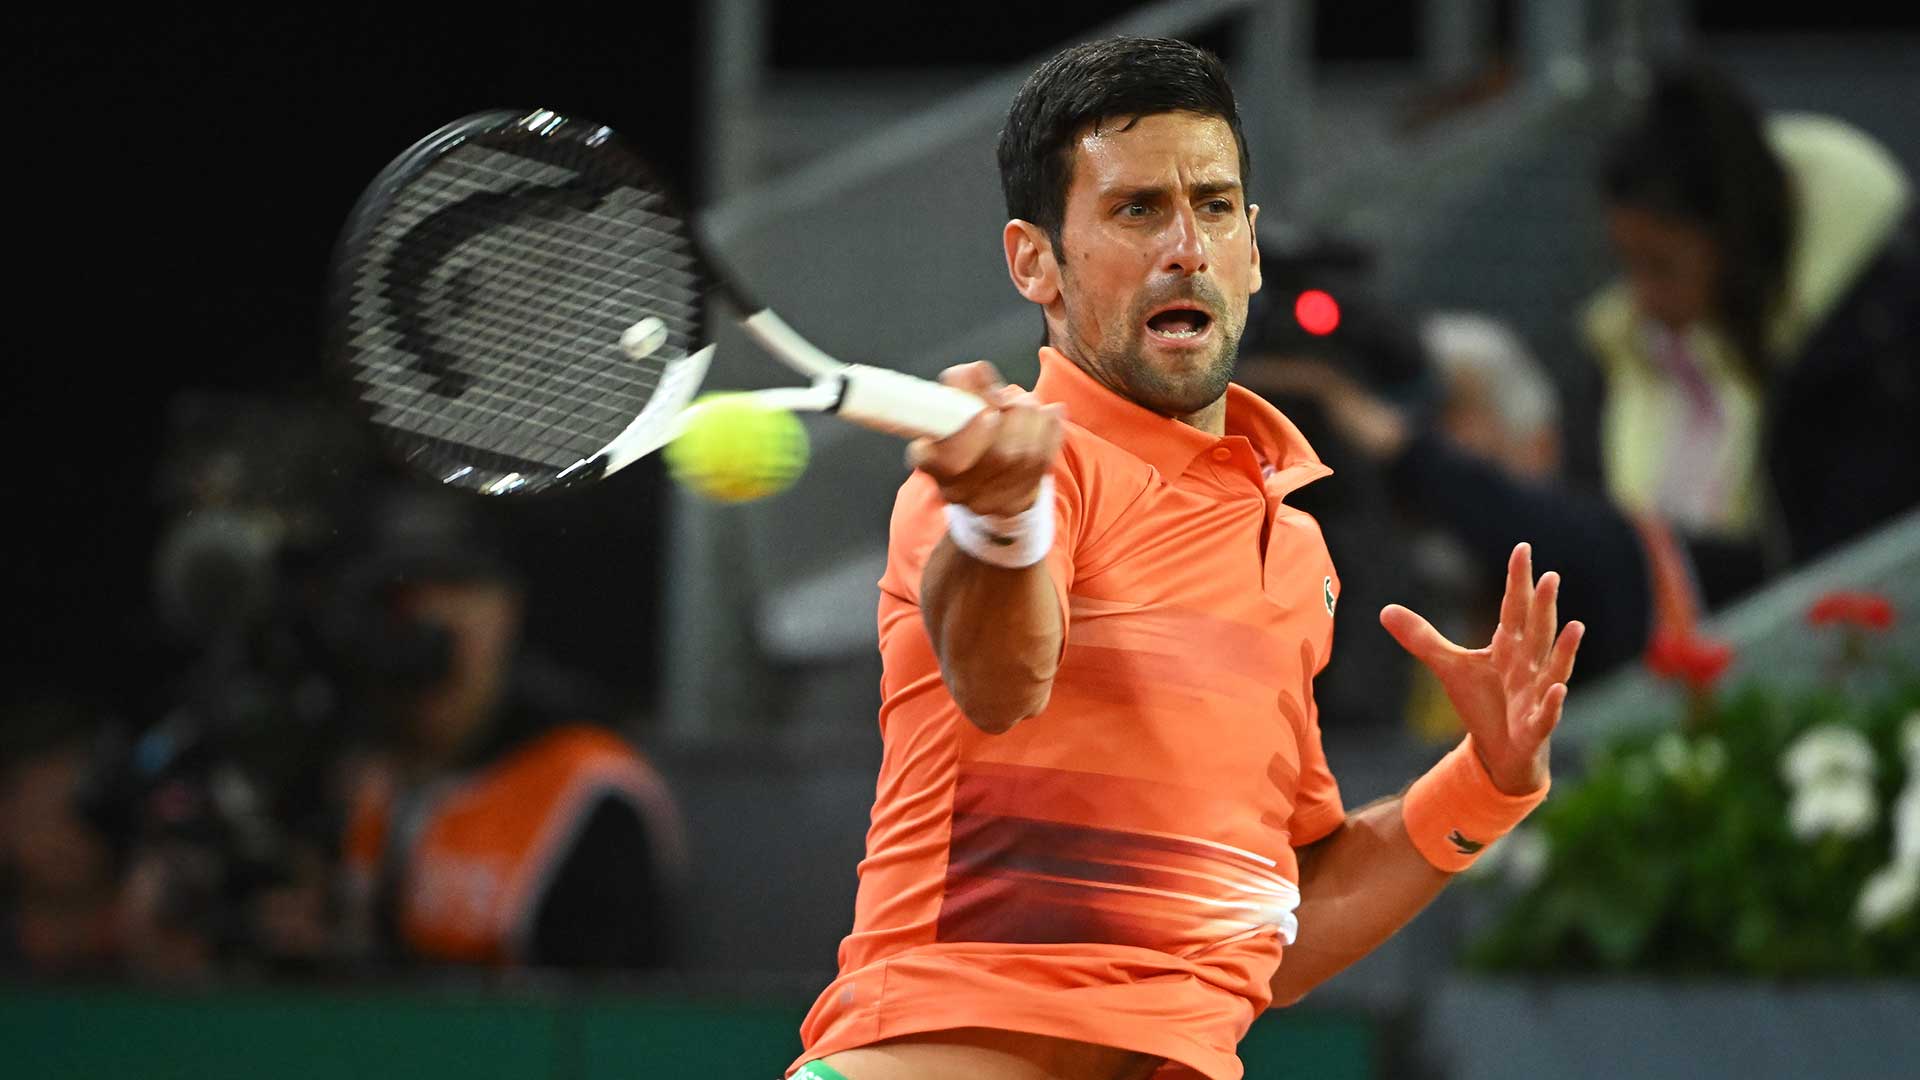 Madrid Open LIVE streaming: BIG DAY AHEAD, How to watch Novak Djokovic, Rafael Nadal, Alexander Zverev, Stefanos Tsitsipas & Carlos Alcaraz matches LIVE in your country, India